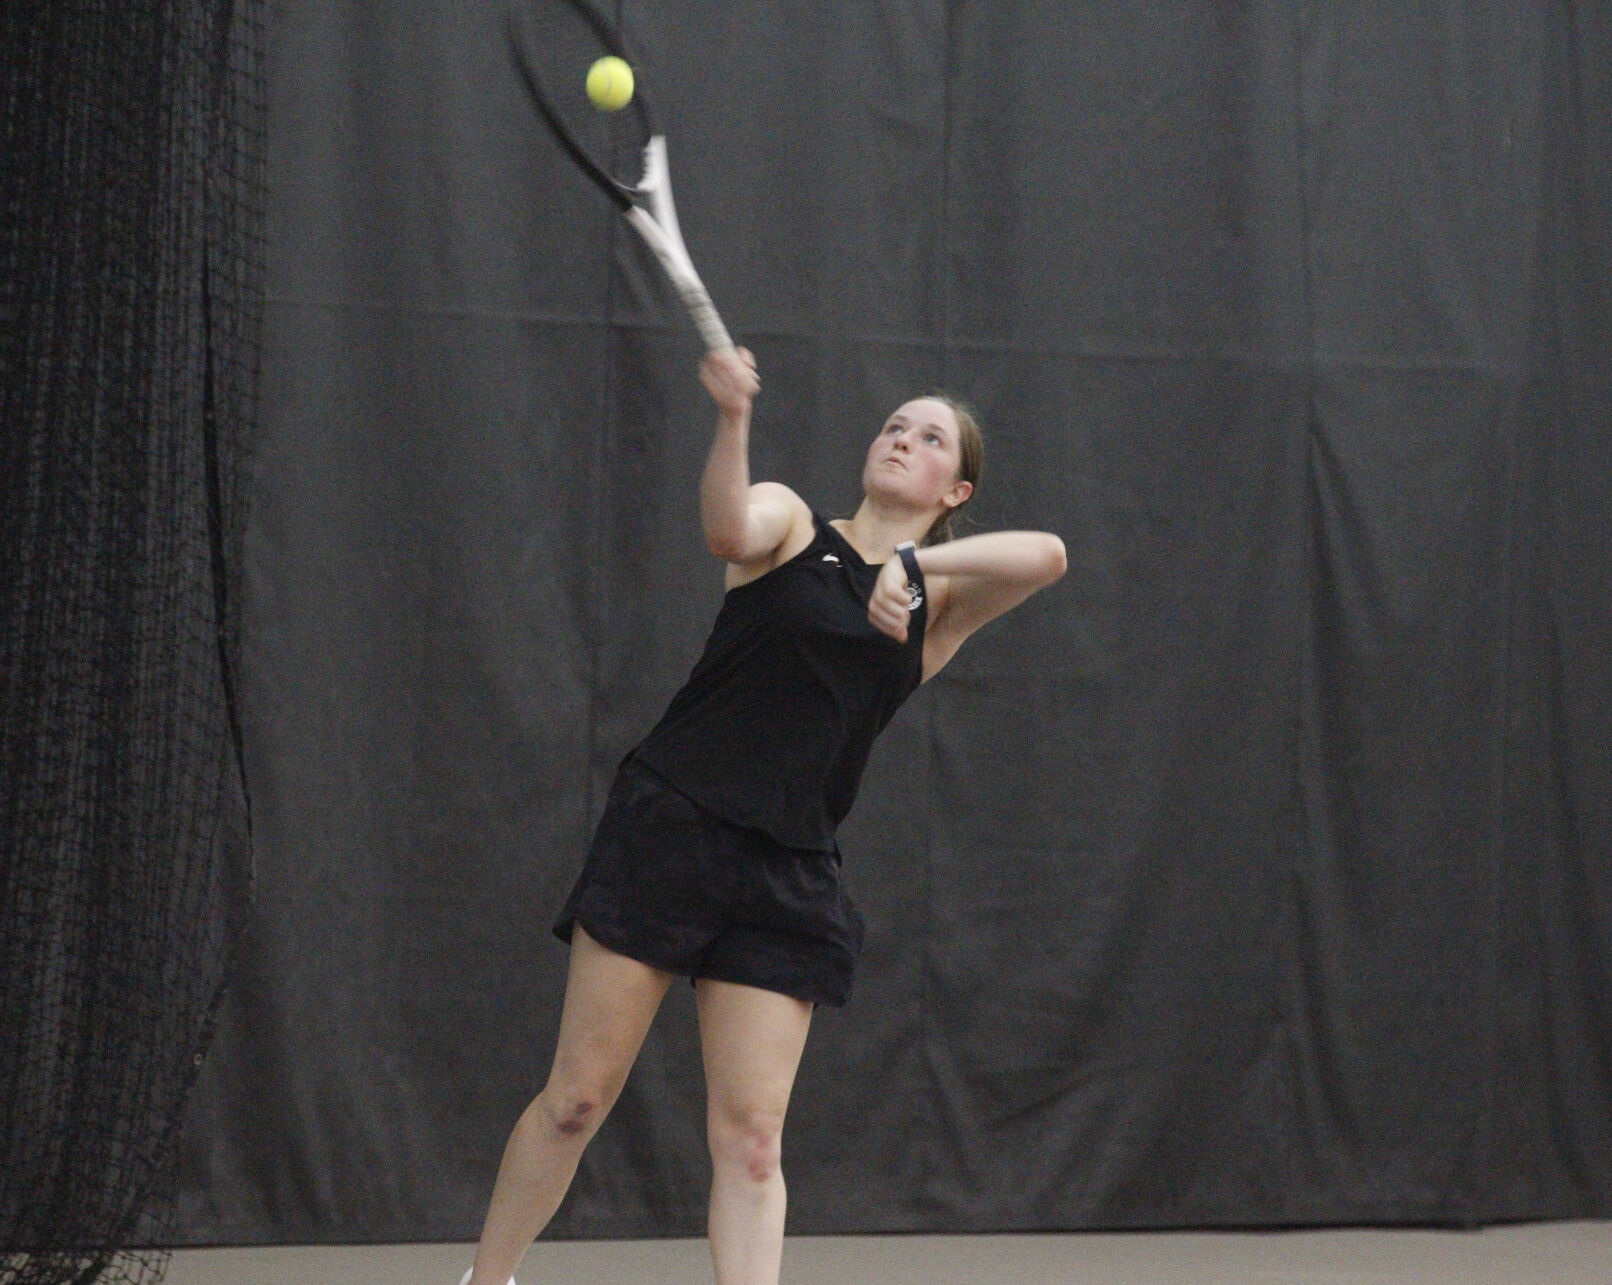 Lebanon Tennis Team Triumphs in Sectional Play, Advances to Semifinals